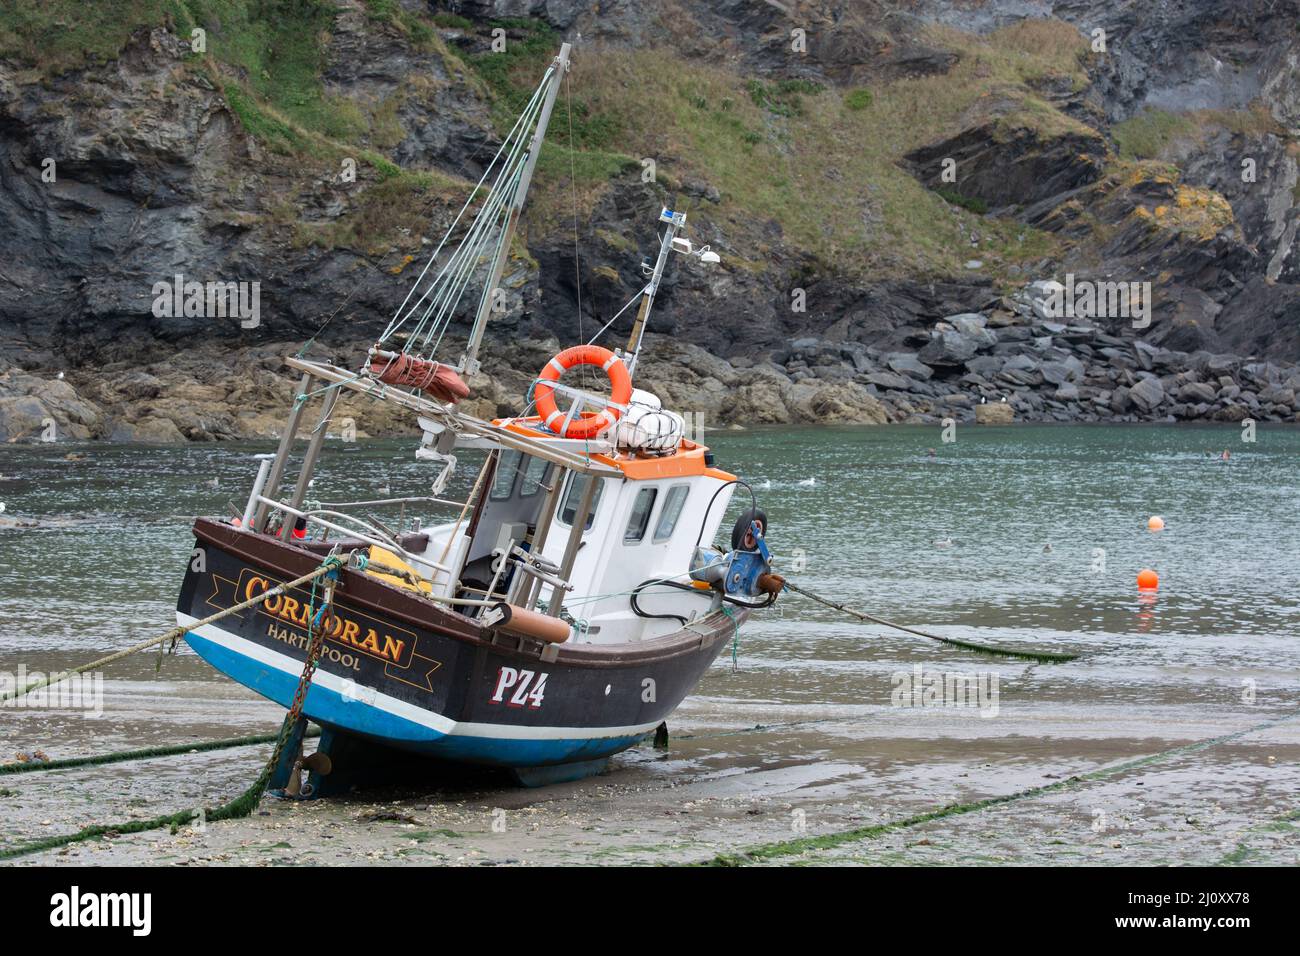 PORT ISAAC, CORNWALL, UK - AUGUST 13 : Fishing boat in Port Isaac in Cornwall on August 13, 2013 Stock Photo